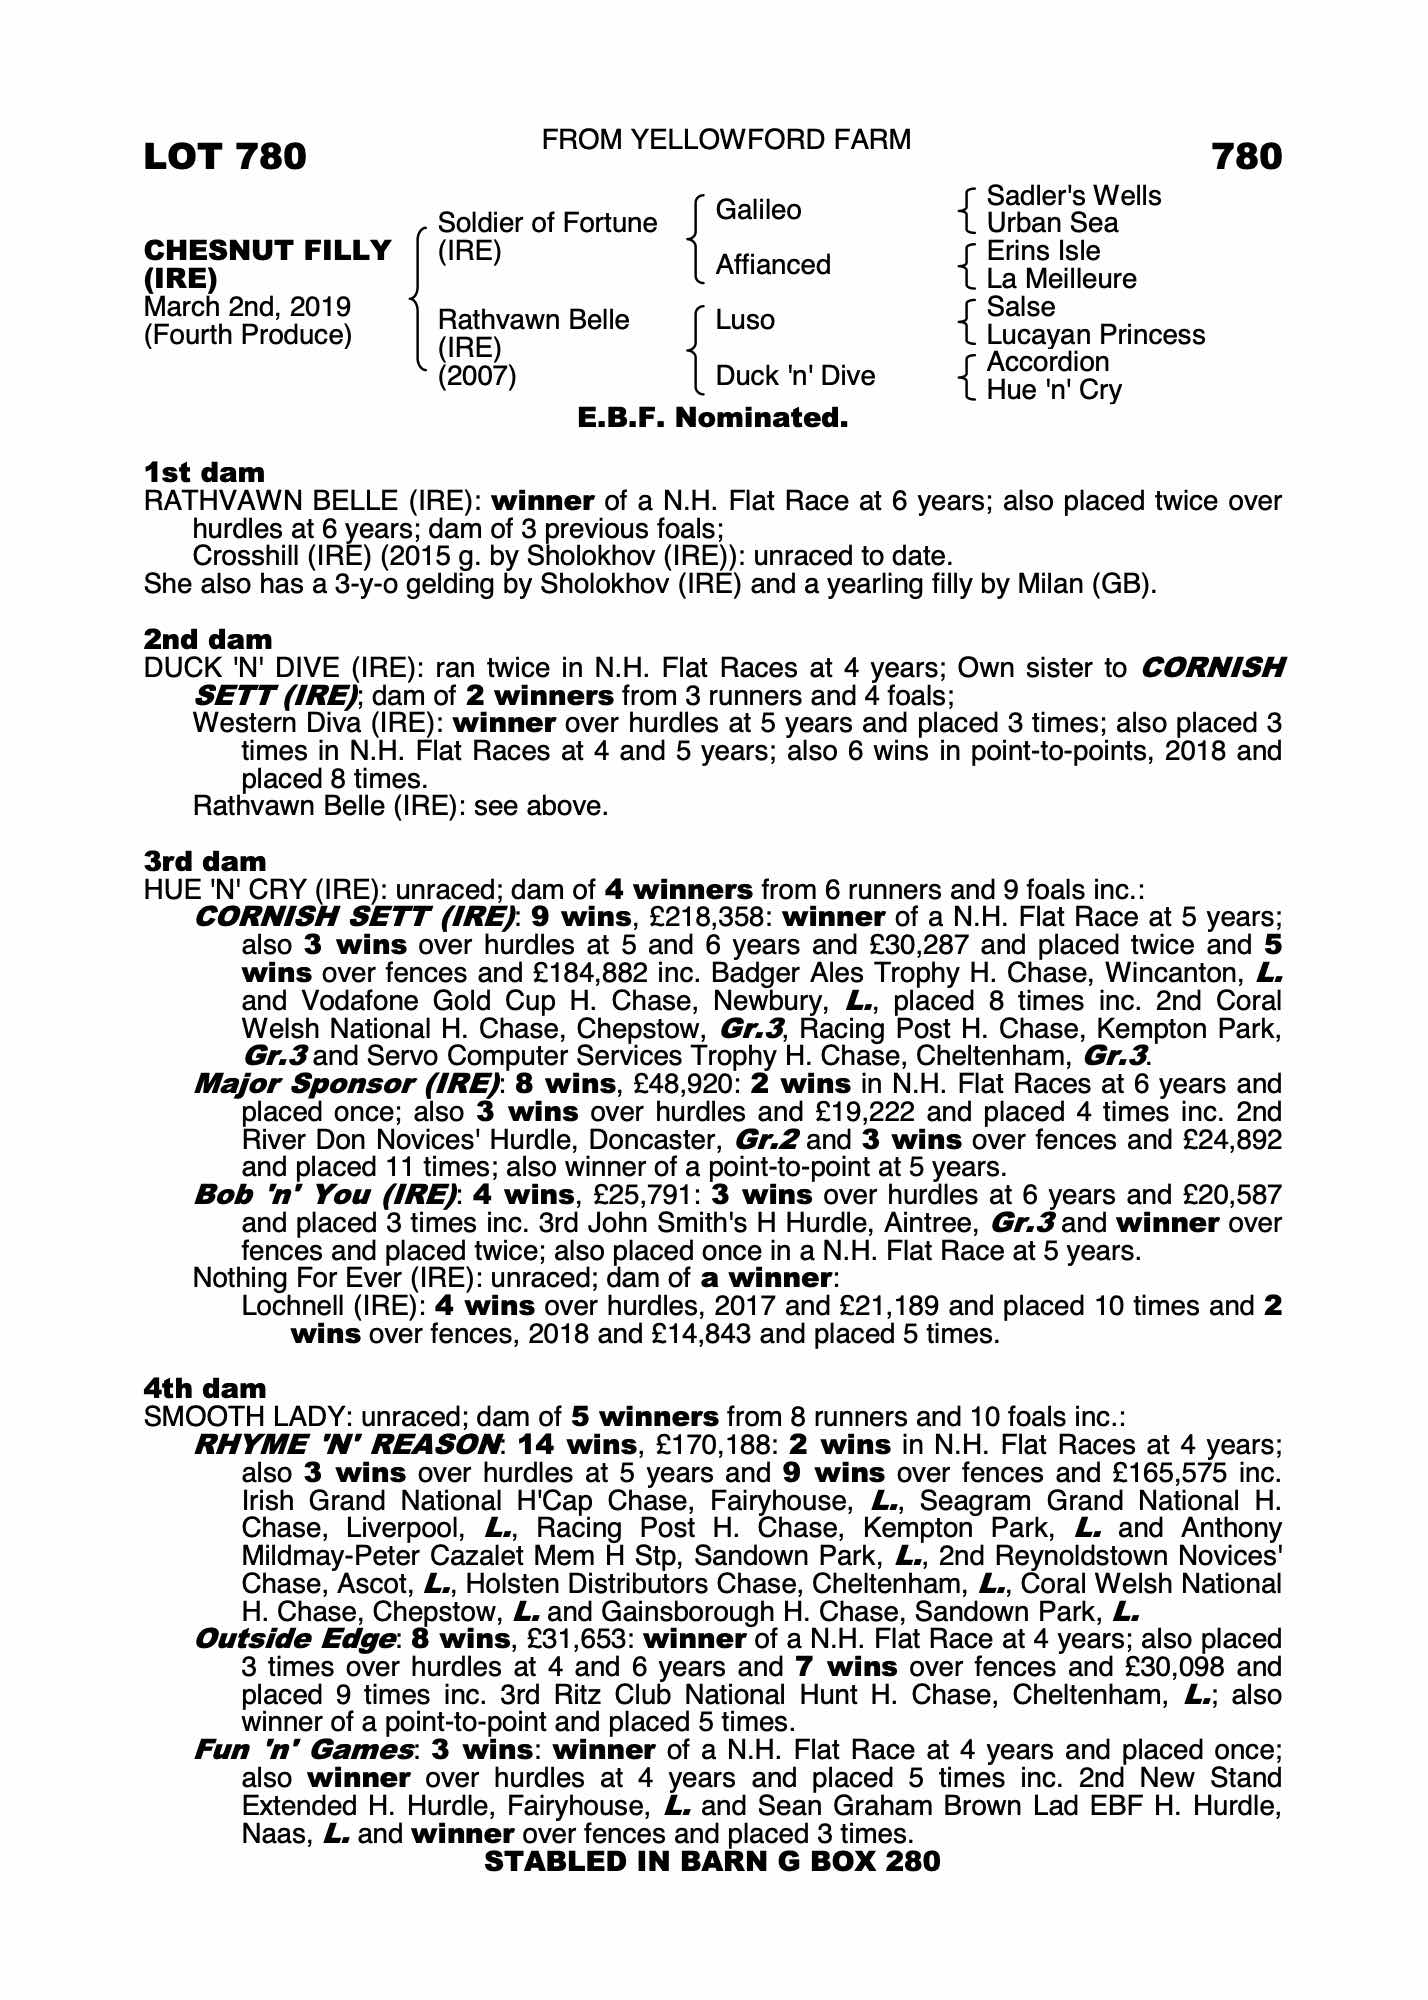 Rathvawn Belle Ire Ch F Ire Back To List Pdf Purchaser Kate Harrington Price 5 000 Consignor Yellowford Farm Sales For Half Brothers Sisters November National Hunt Sale Lot 704 C By Milan Gb Yellowford Farm Kilbride Equine